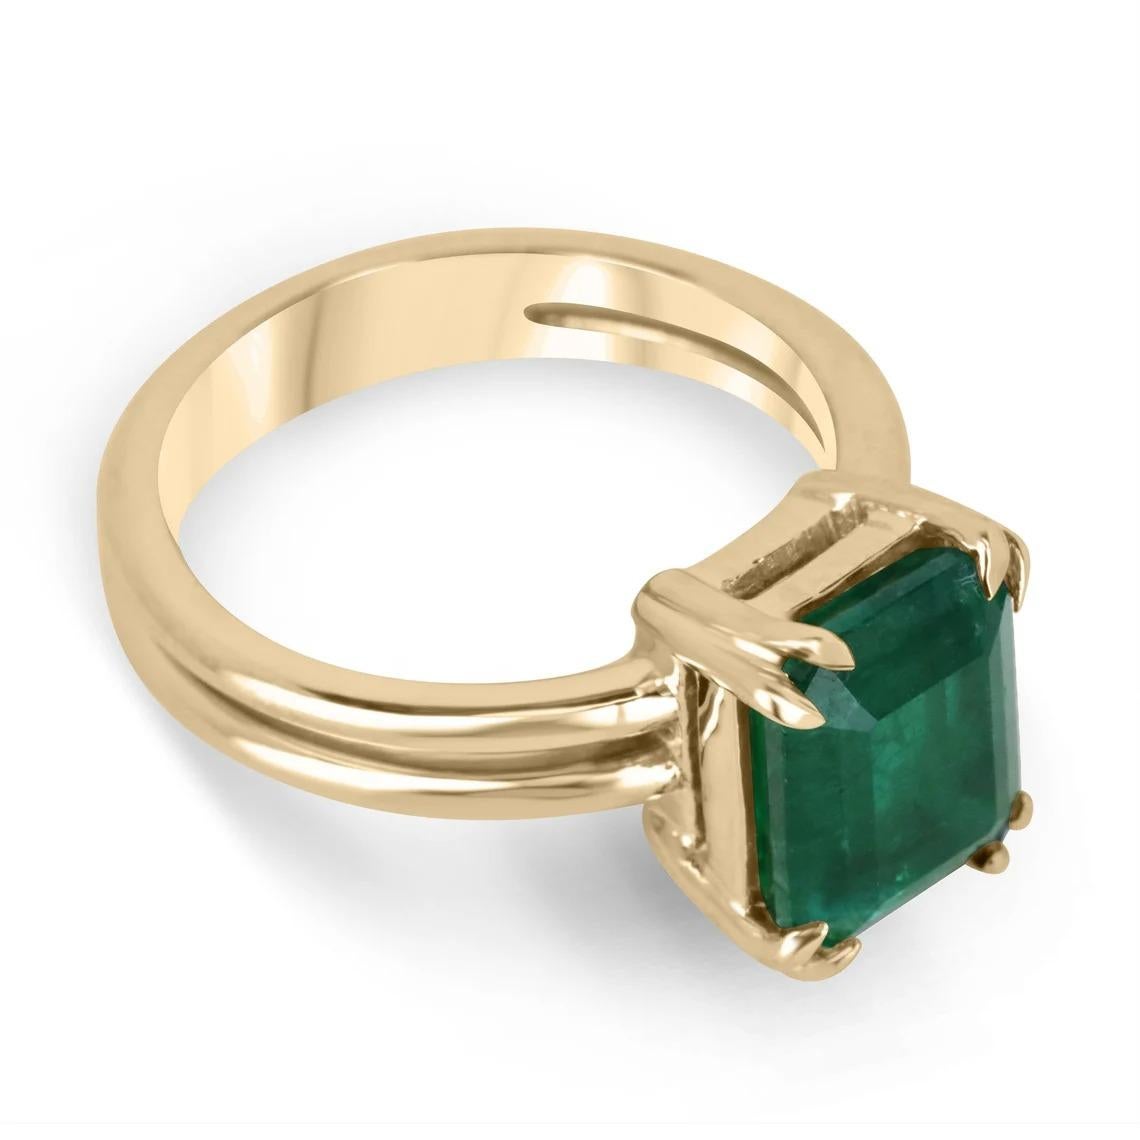 This 3.28-carat natural Zambian emerald is a true statement piece. The deep, dark green color of the stone is absolutely breathtaking and is sure to draw attention. The emerald is set in a simple four-prong setting with double claw prongs, which